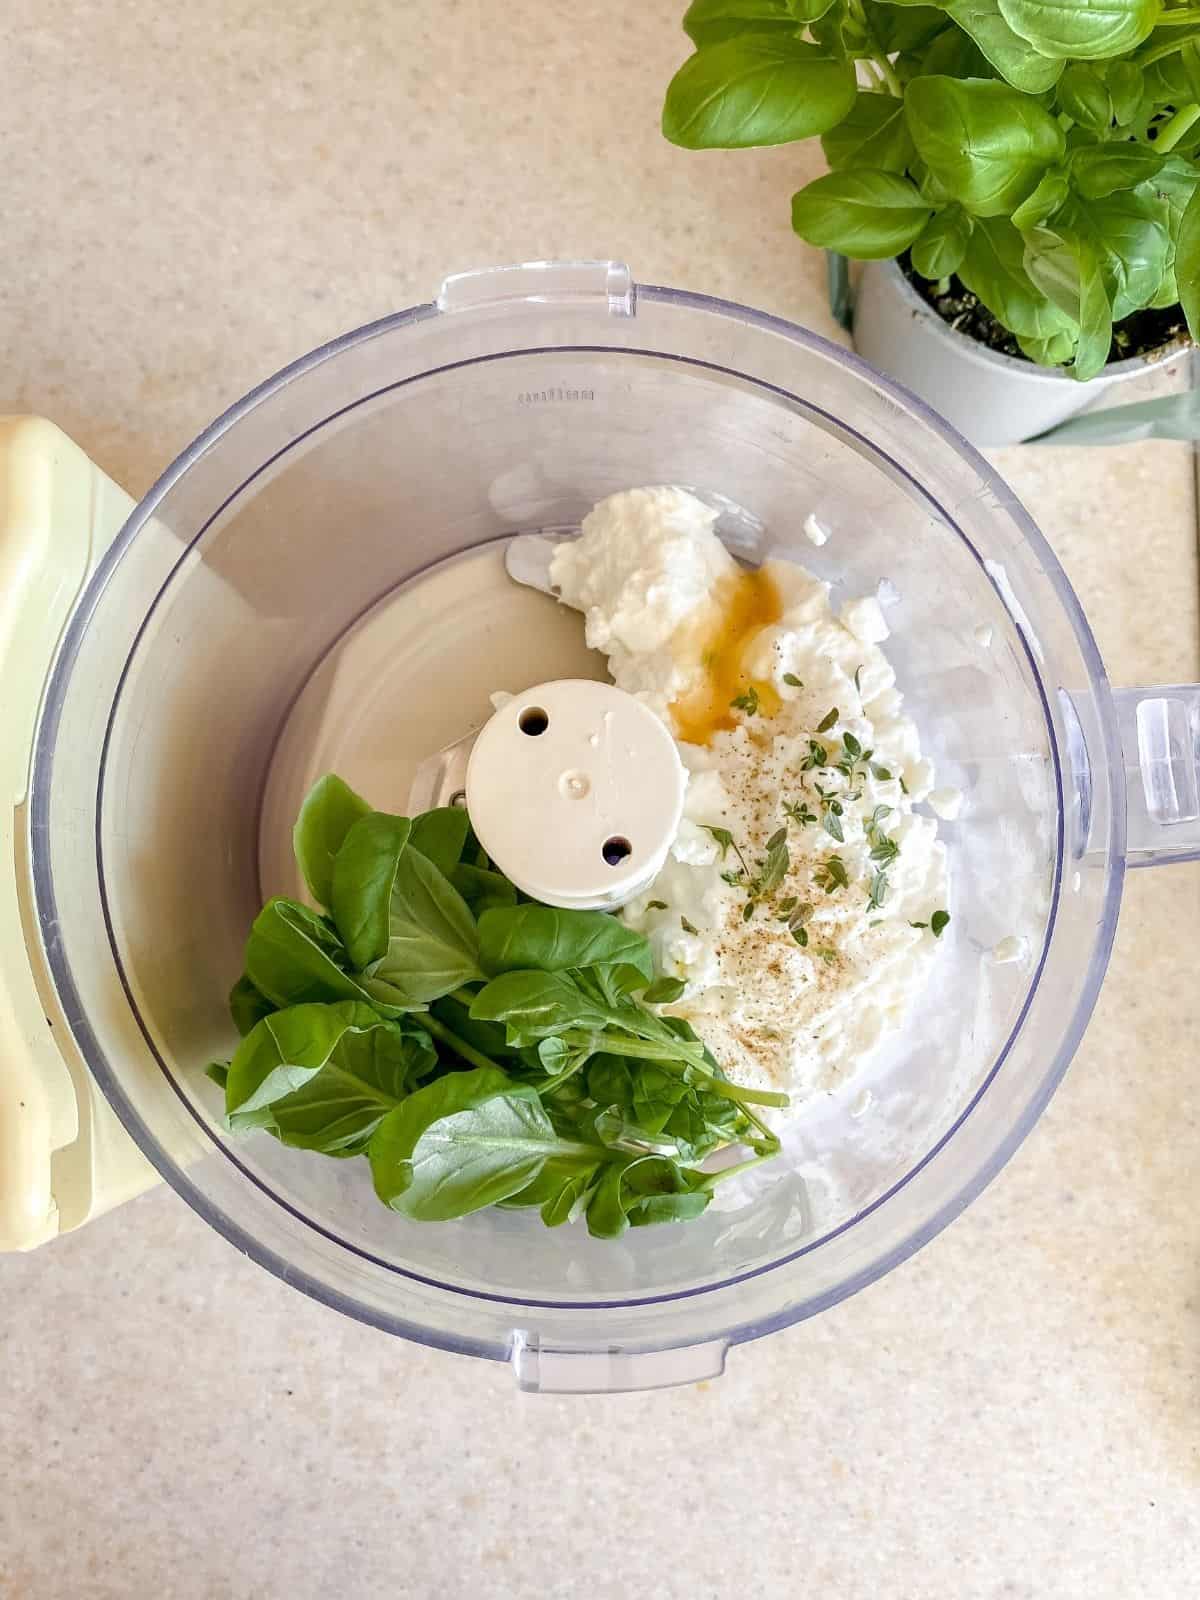 ricotta, honey and basil in a food processor.